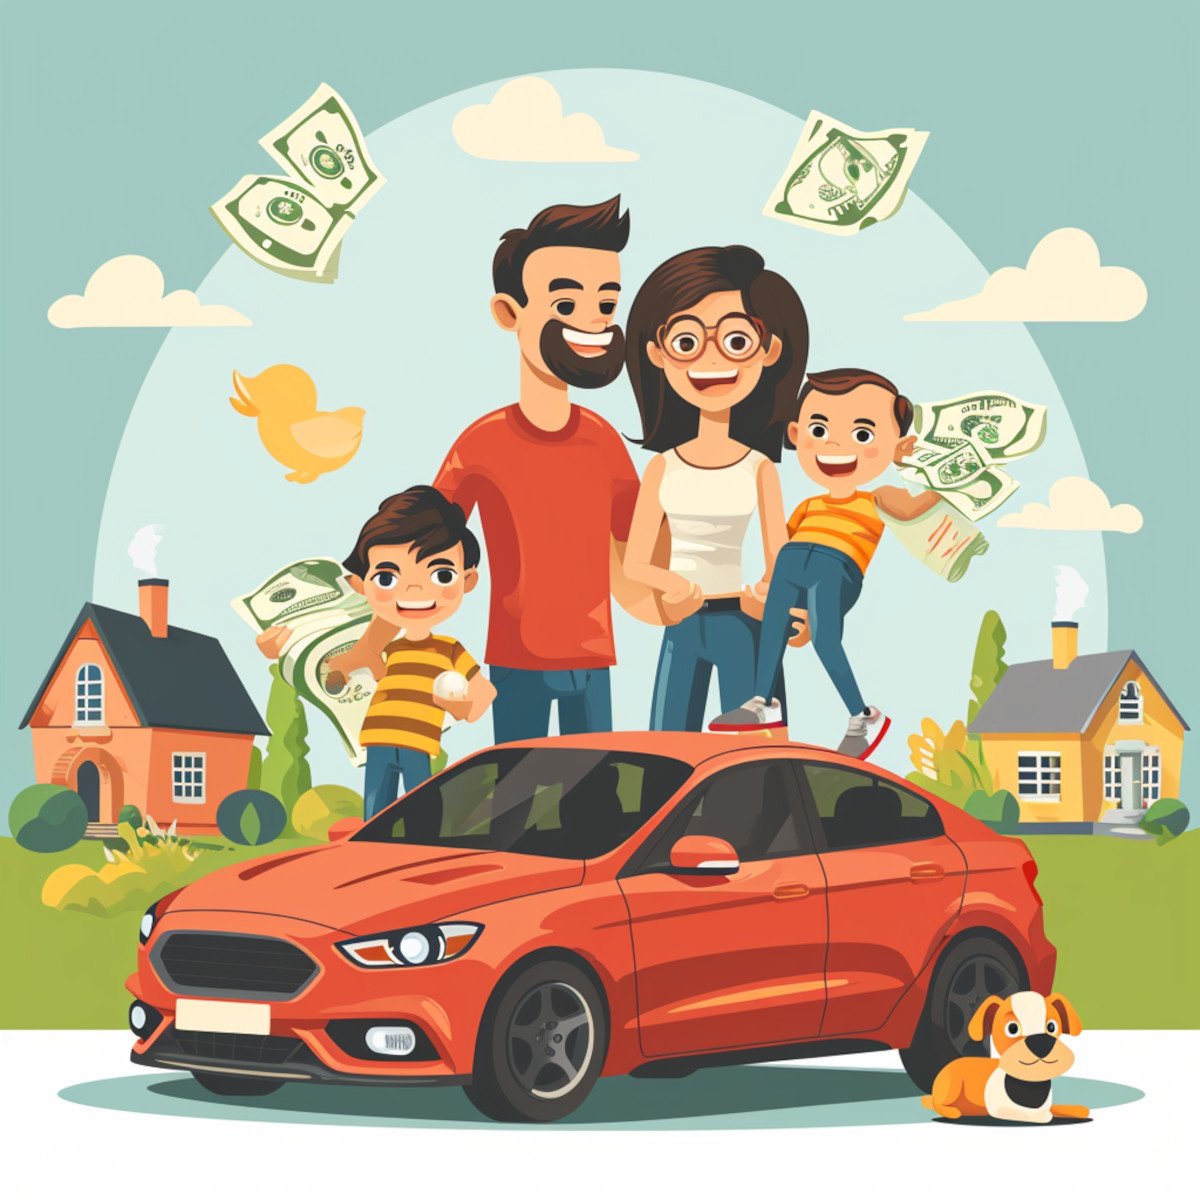 happy_family_standing_beside_their_Ford_car_holding_a_large_wad_of_cash_due_to_ford_insurance_savings